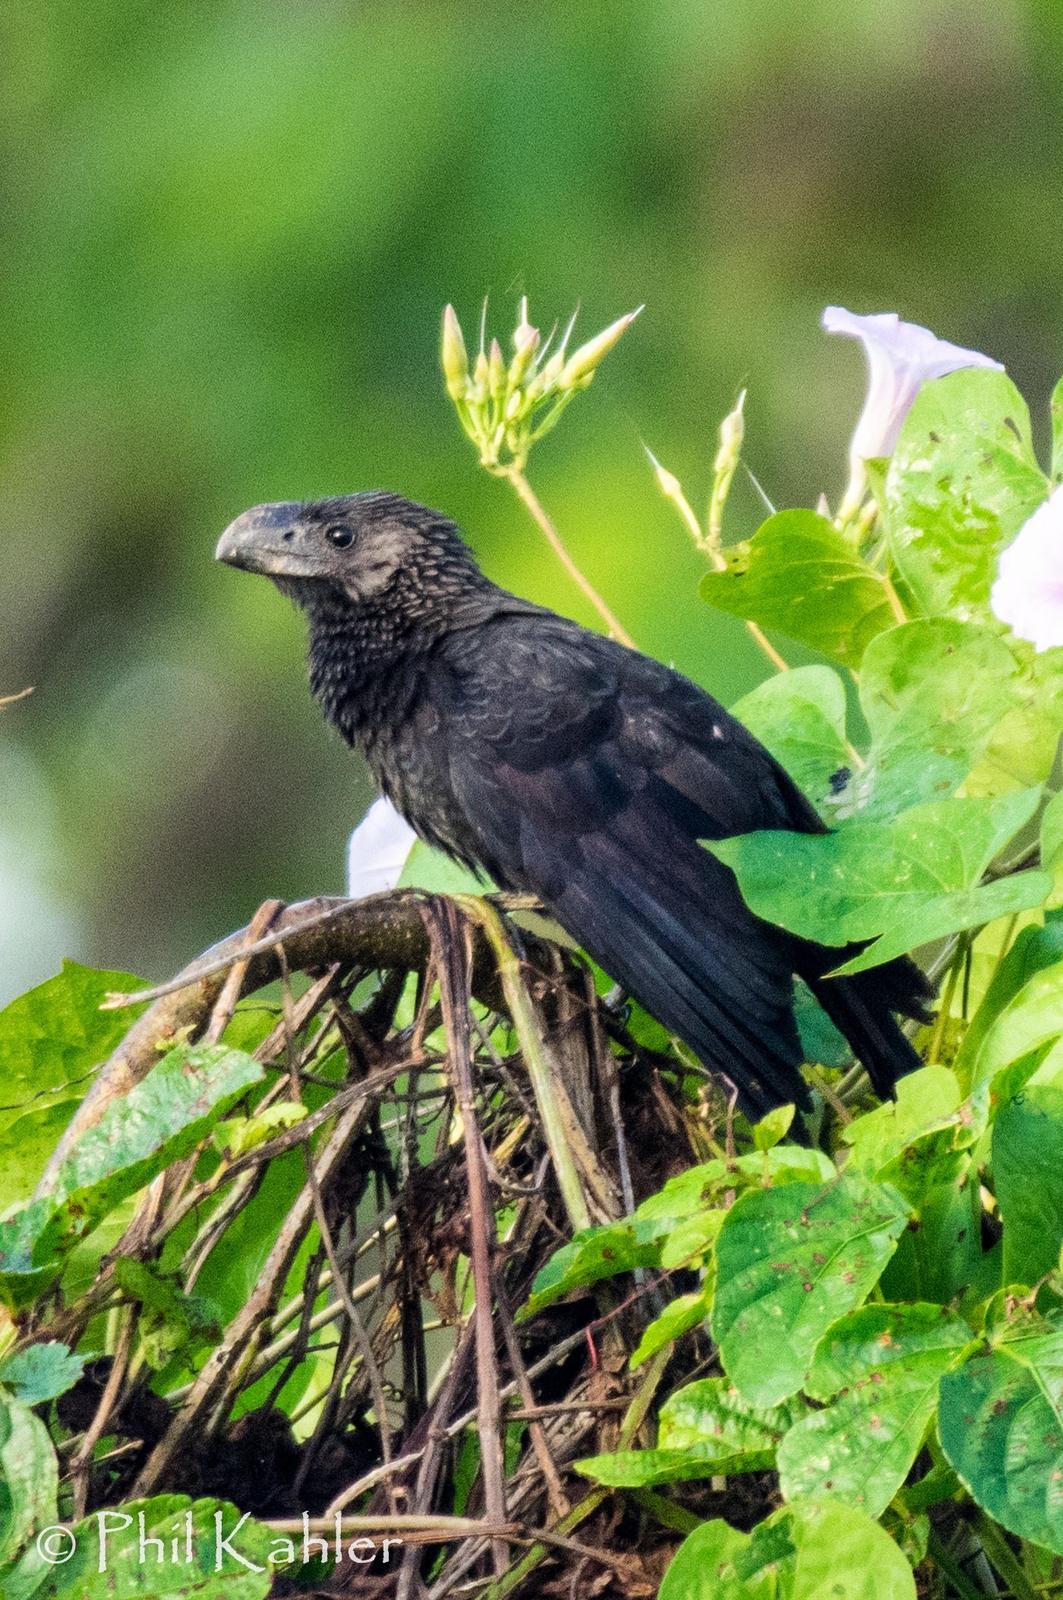 Smooth-billed Ani Photo by Phil Kahler